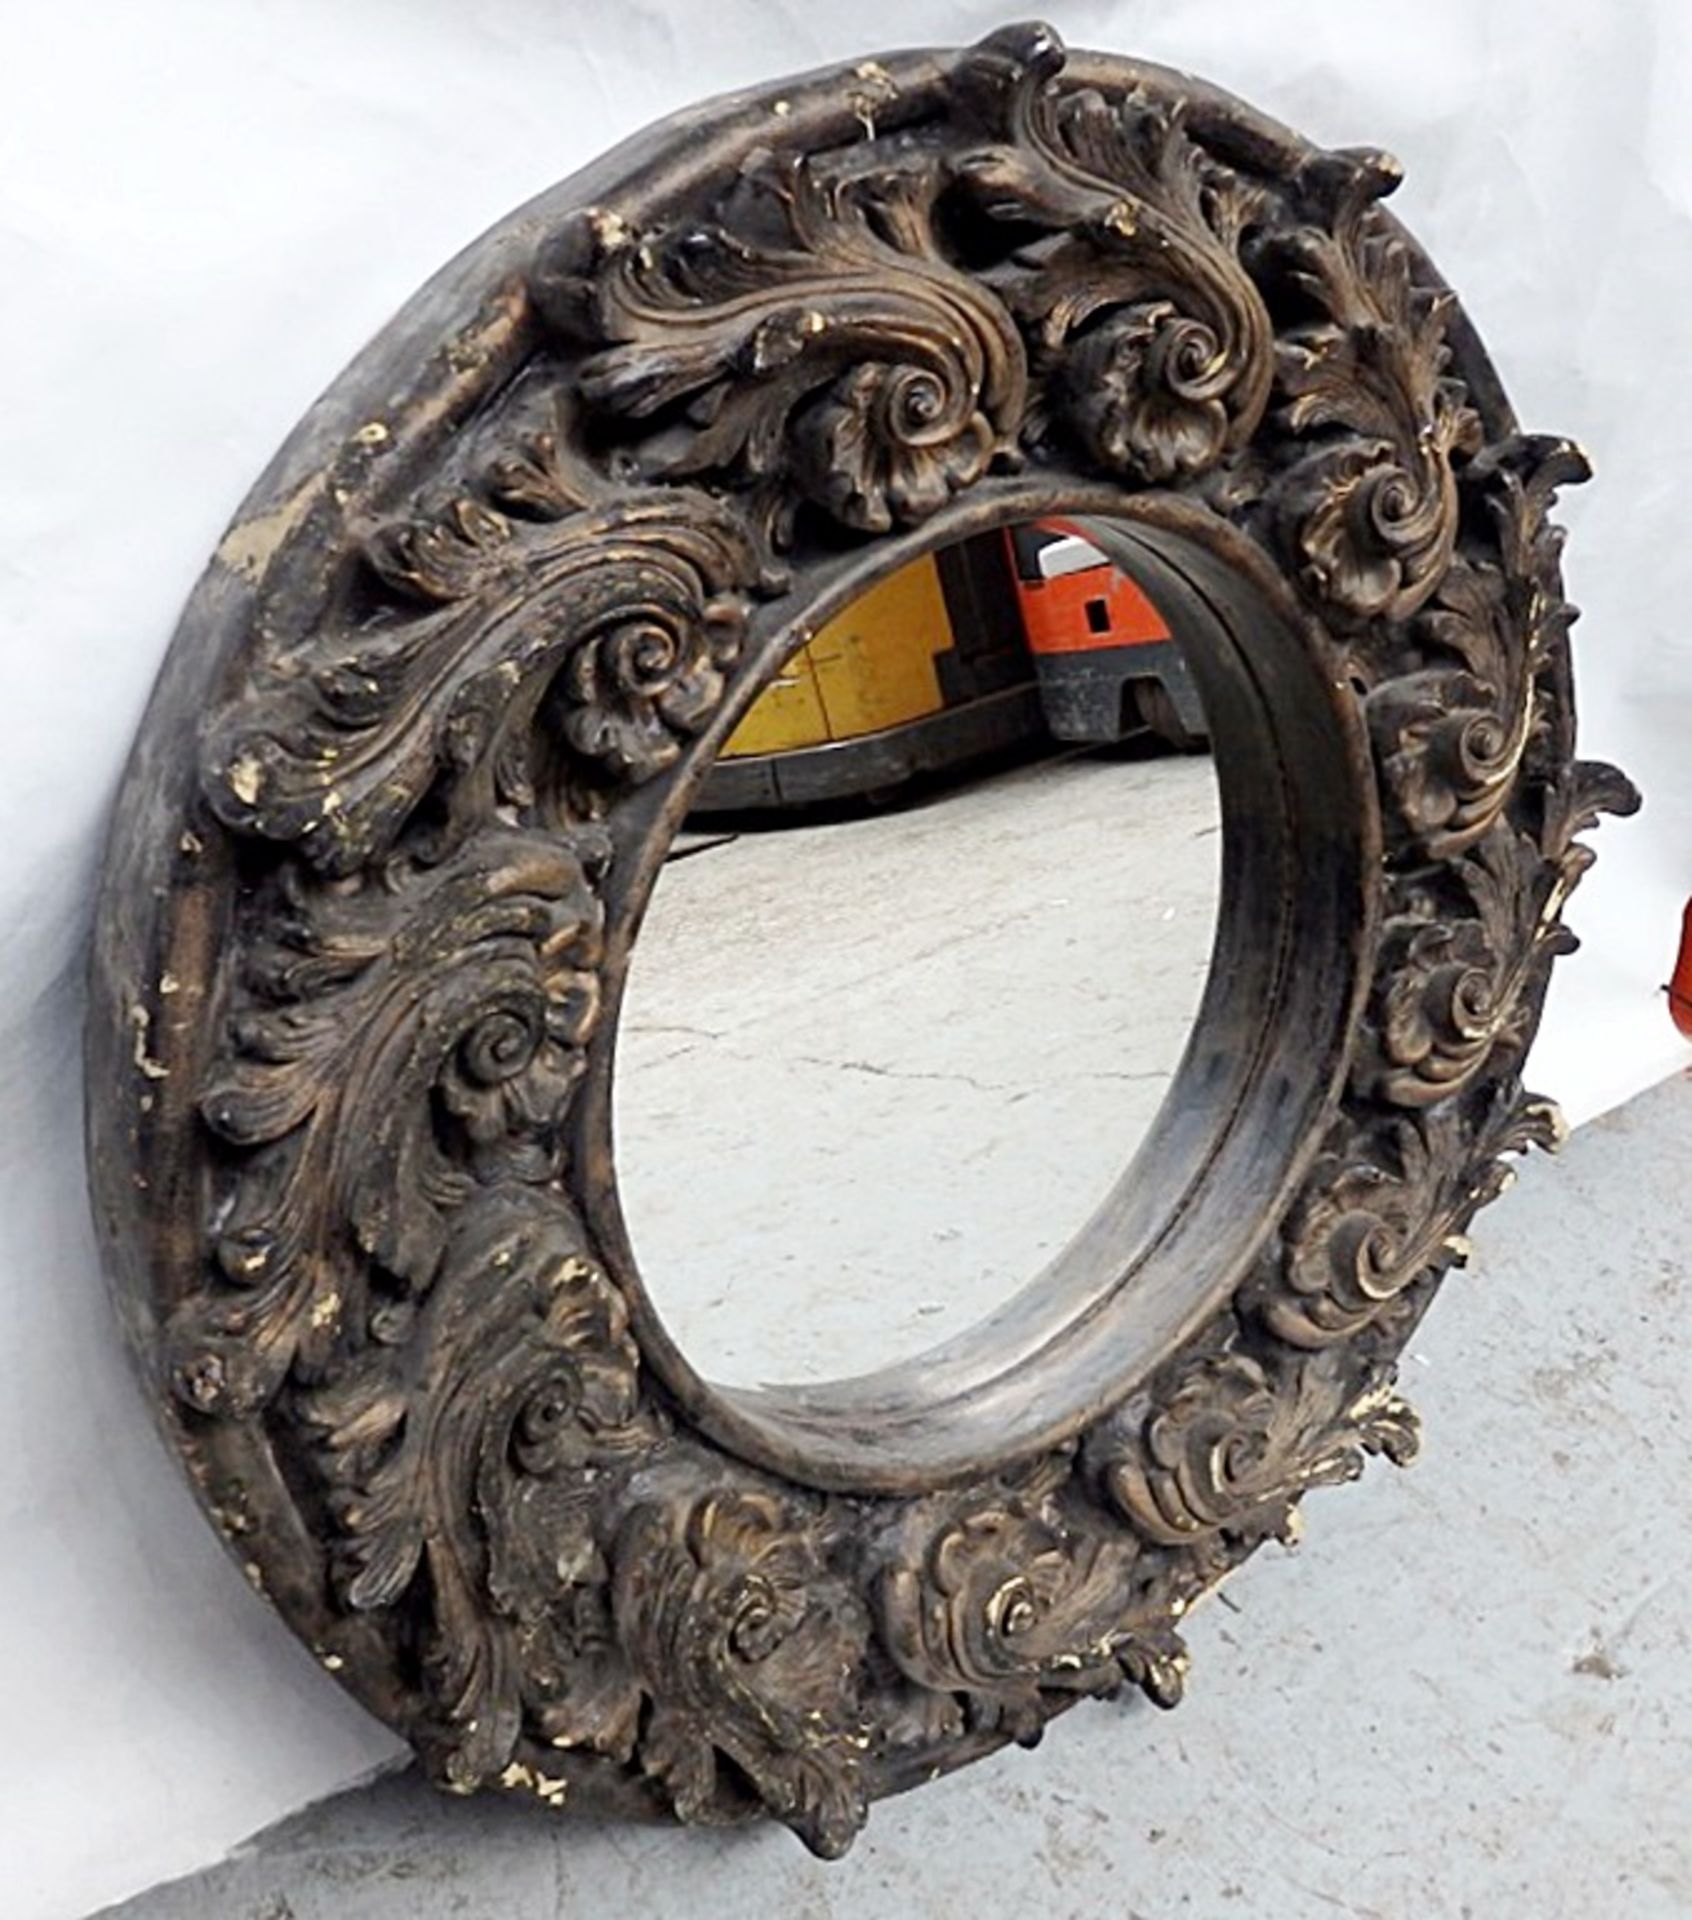 1 x Large "Alan Wallis" Antique-Style Distressed Shabby-Chic Rococo Floral Circular Wall Mirror -